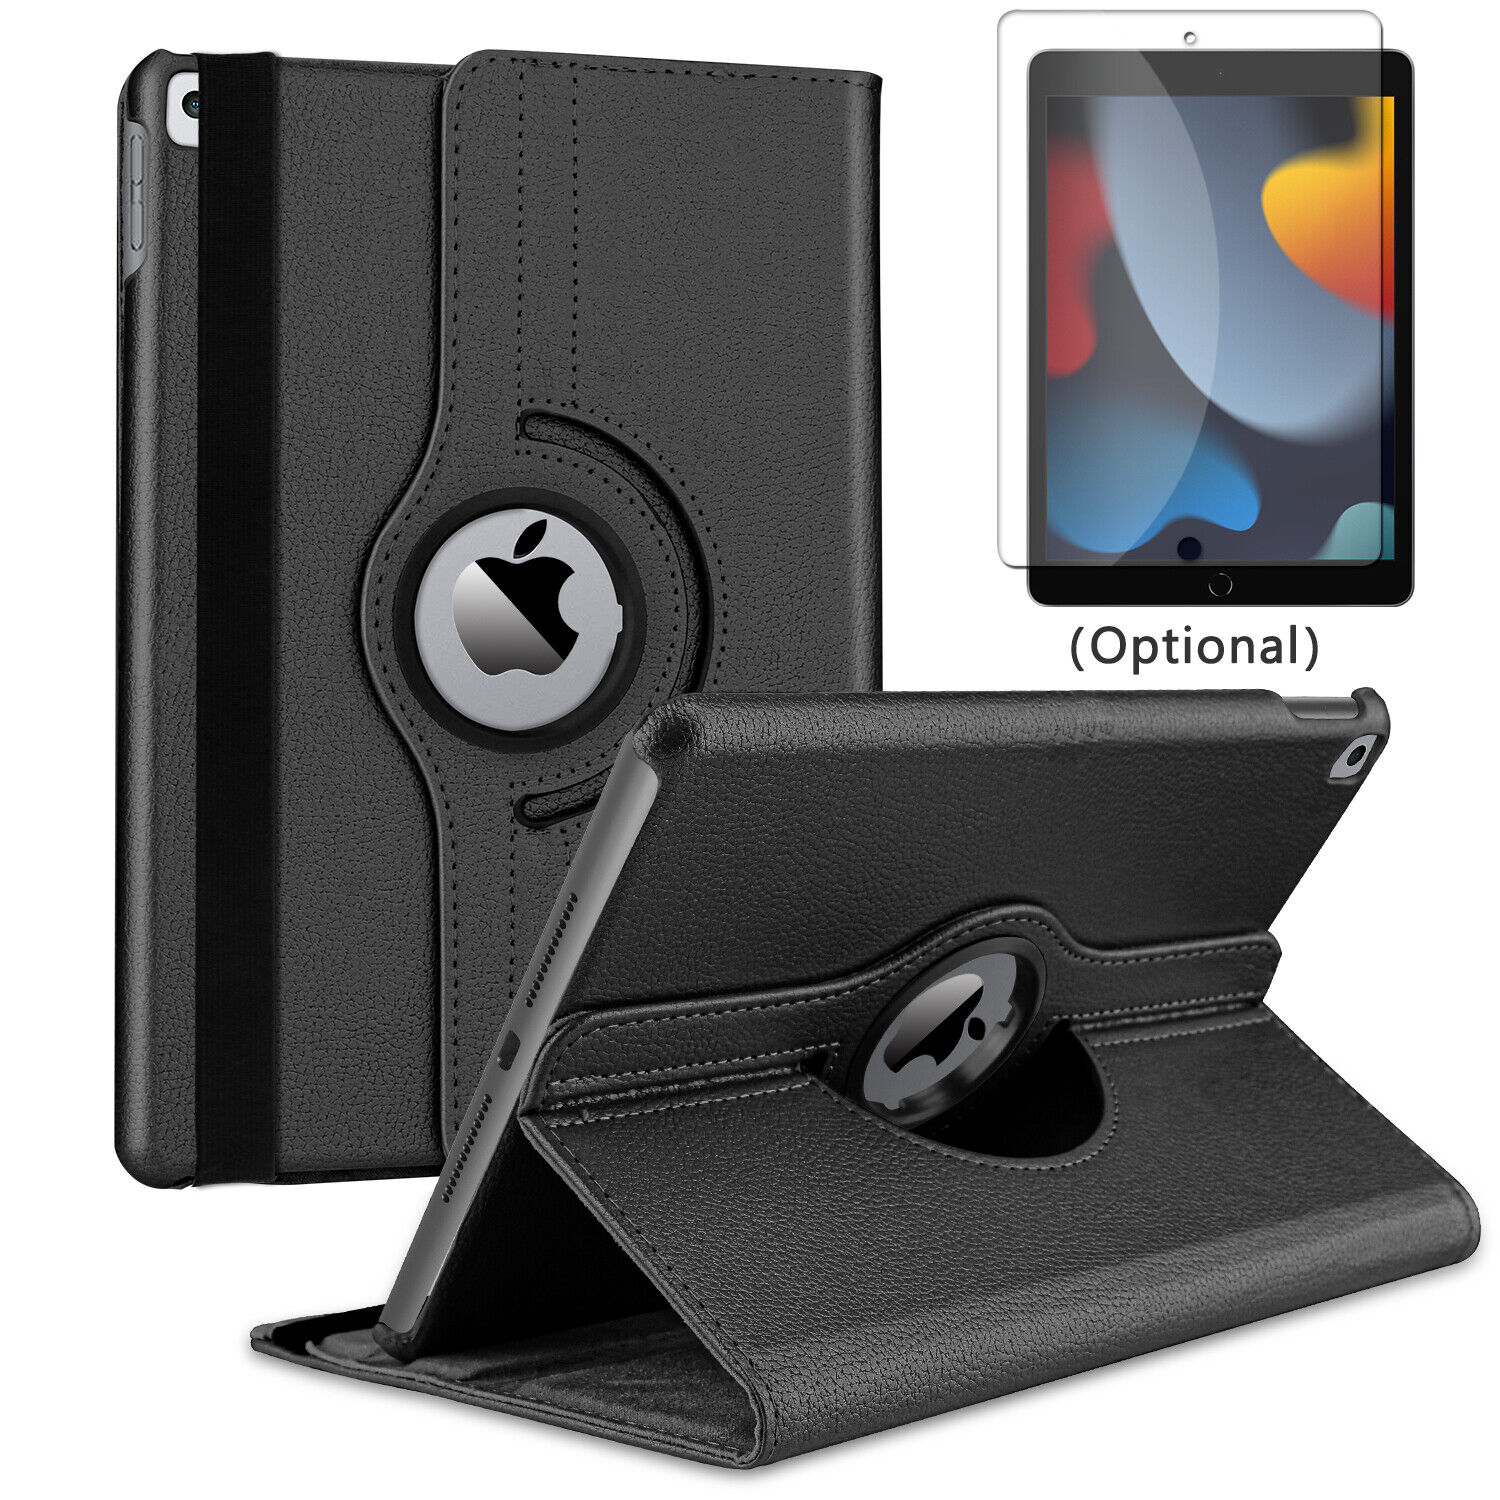 For iPad 10th 9th 8th 7th Generation, 10.2'' Case Leather Stand,Screen Protector